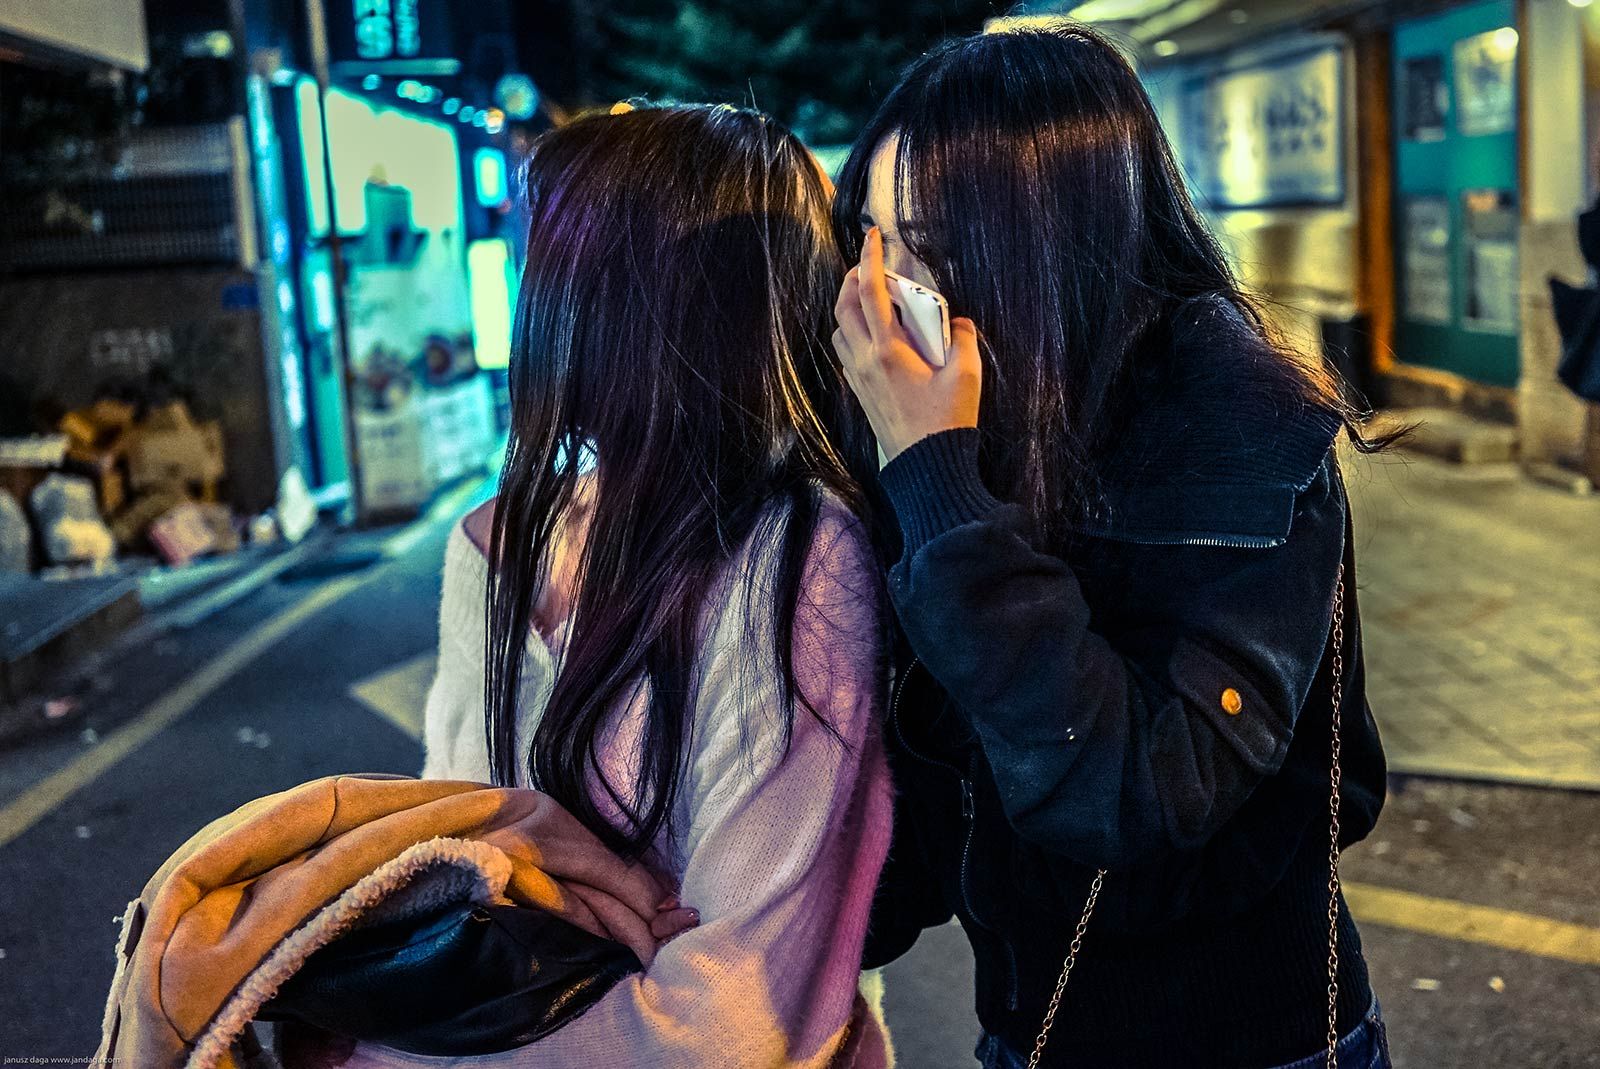 © JANUSZ DAGA - Image from the a night in seoul  photography project